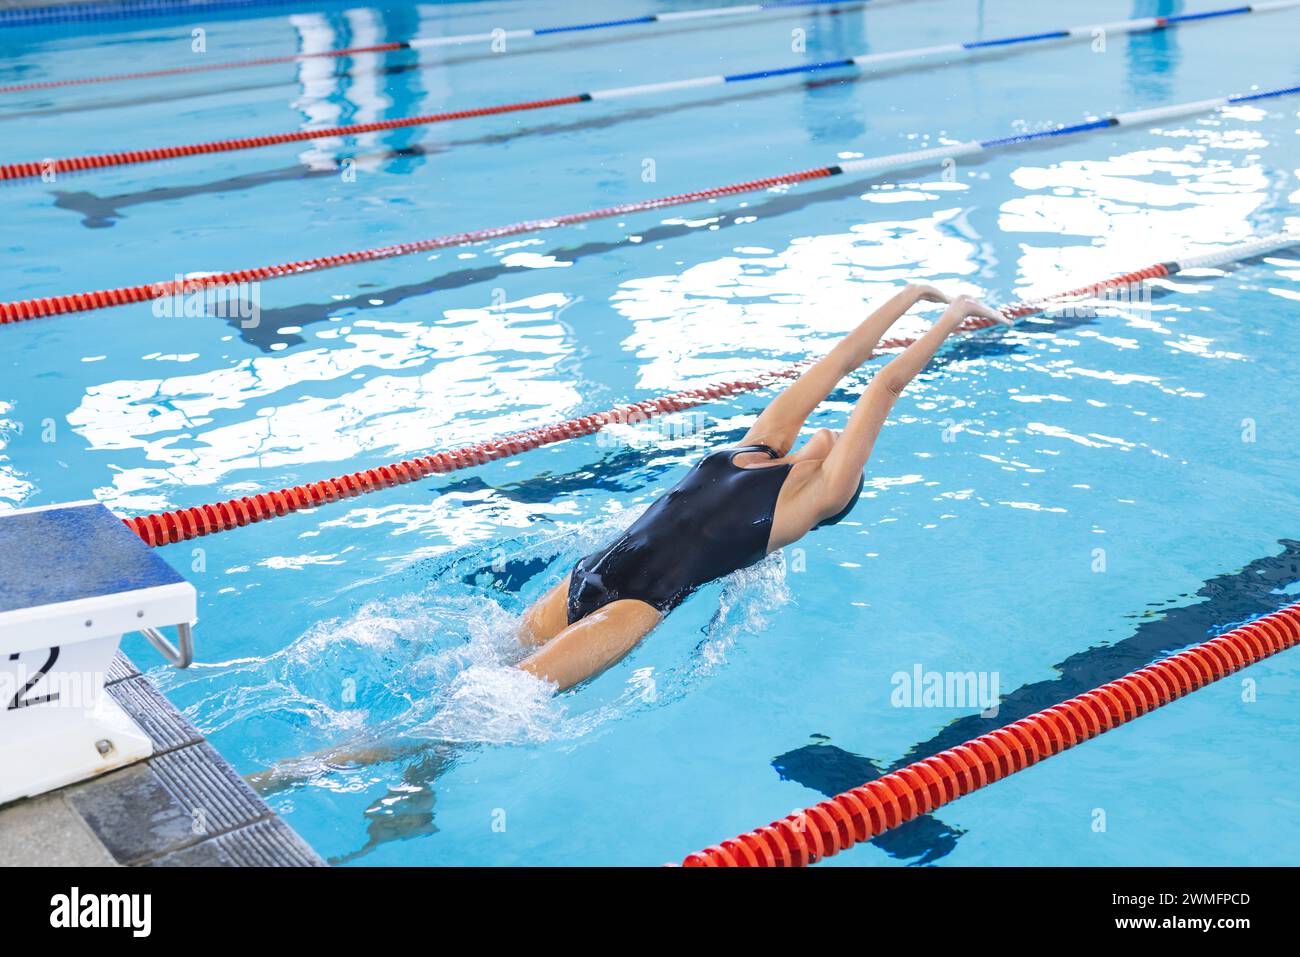 Swimmer dives into a pool at a competitive event, with copy space Stock Photo